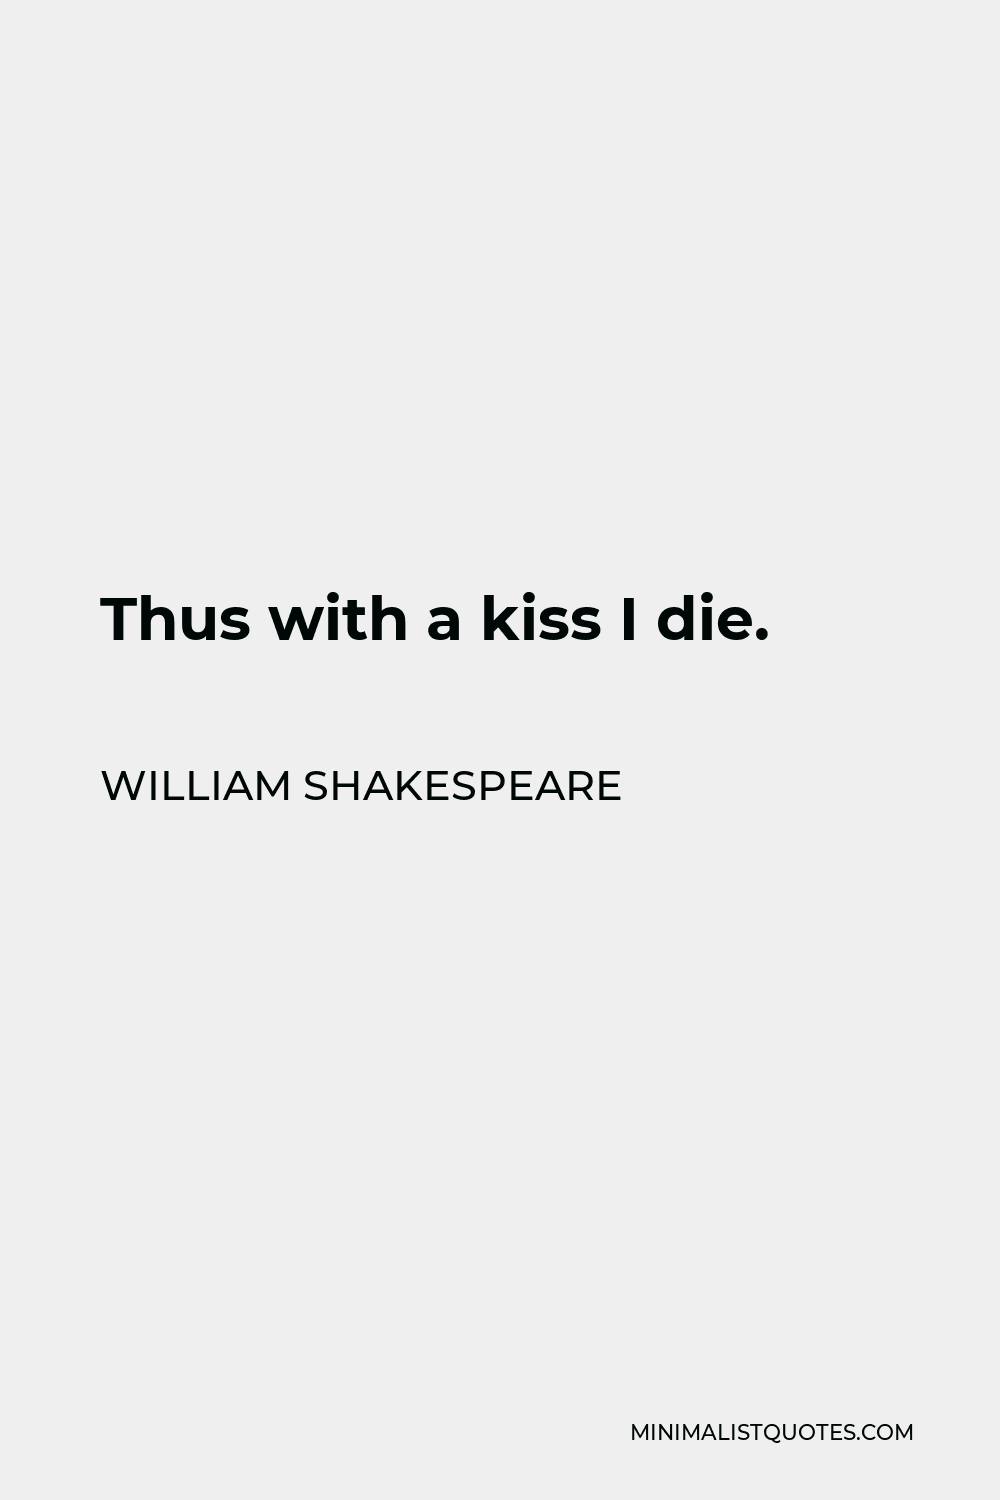 William Shakespeare Quote - Thus with a kiss I die.